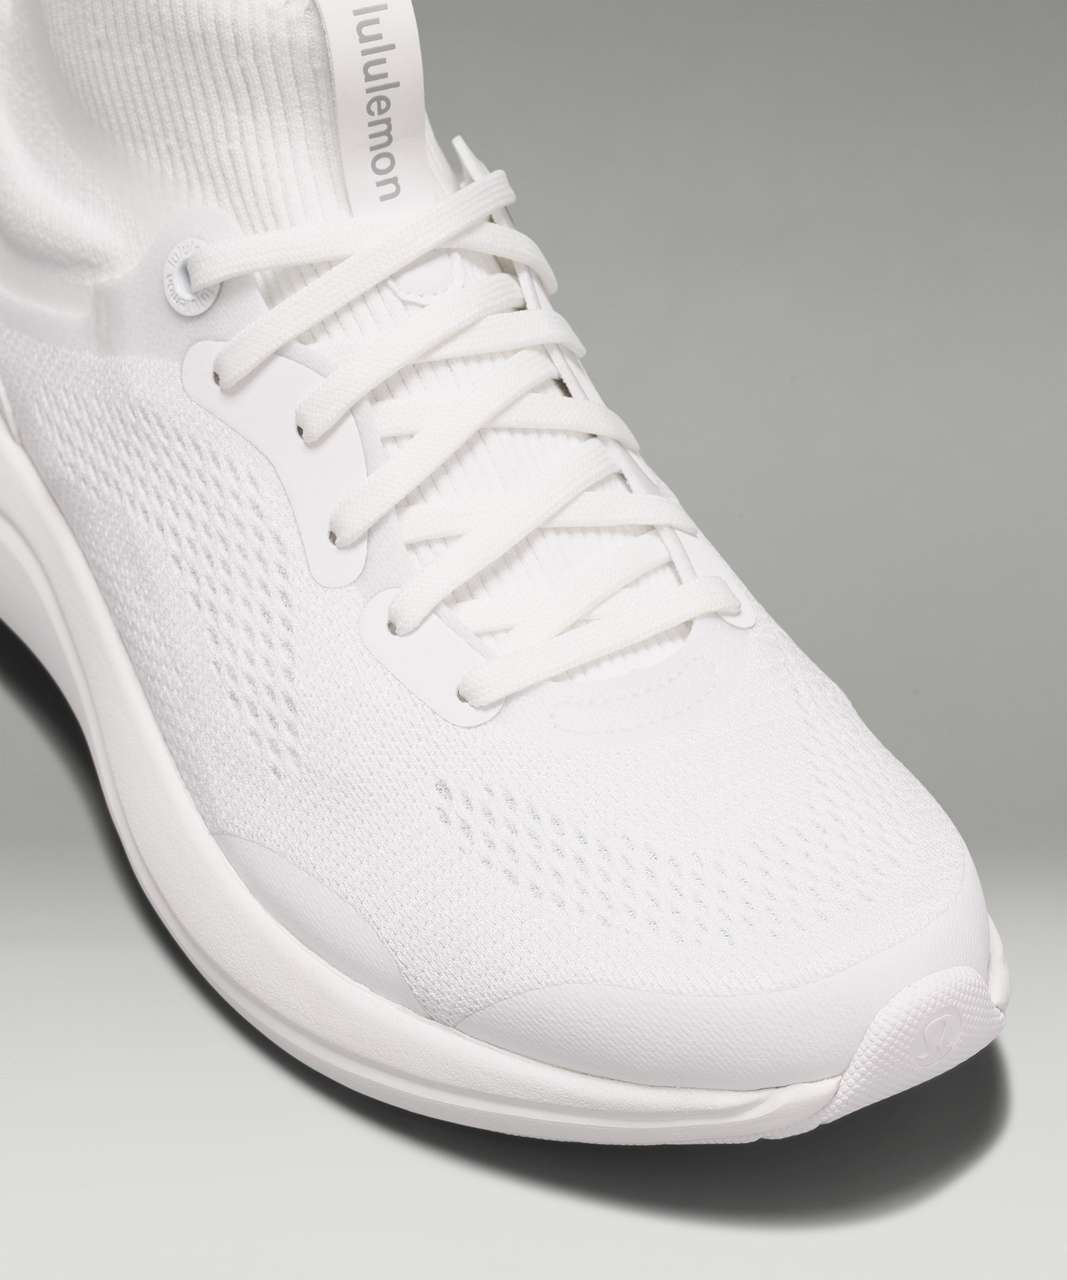 Lululemon Chargefeel Mid Womens Workout Shoe - White / Anchor / White ...